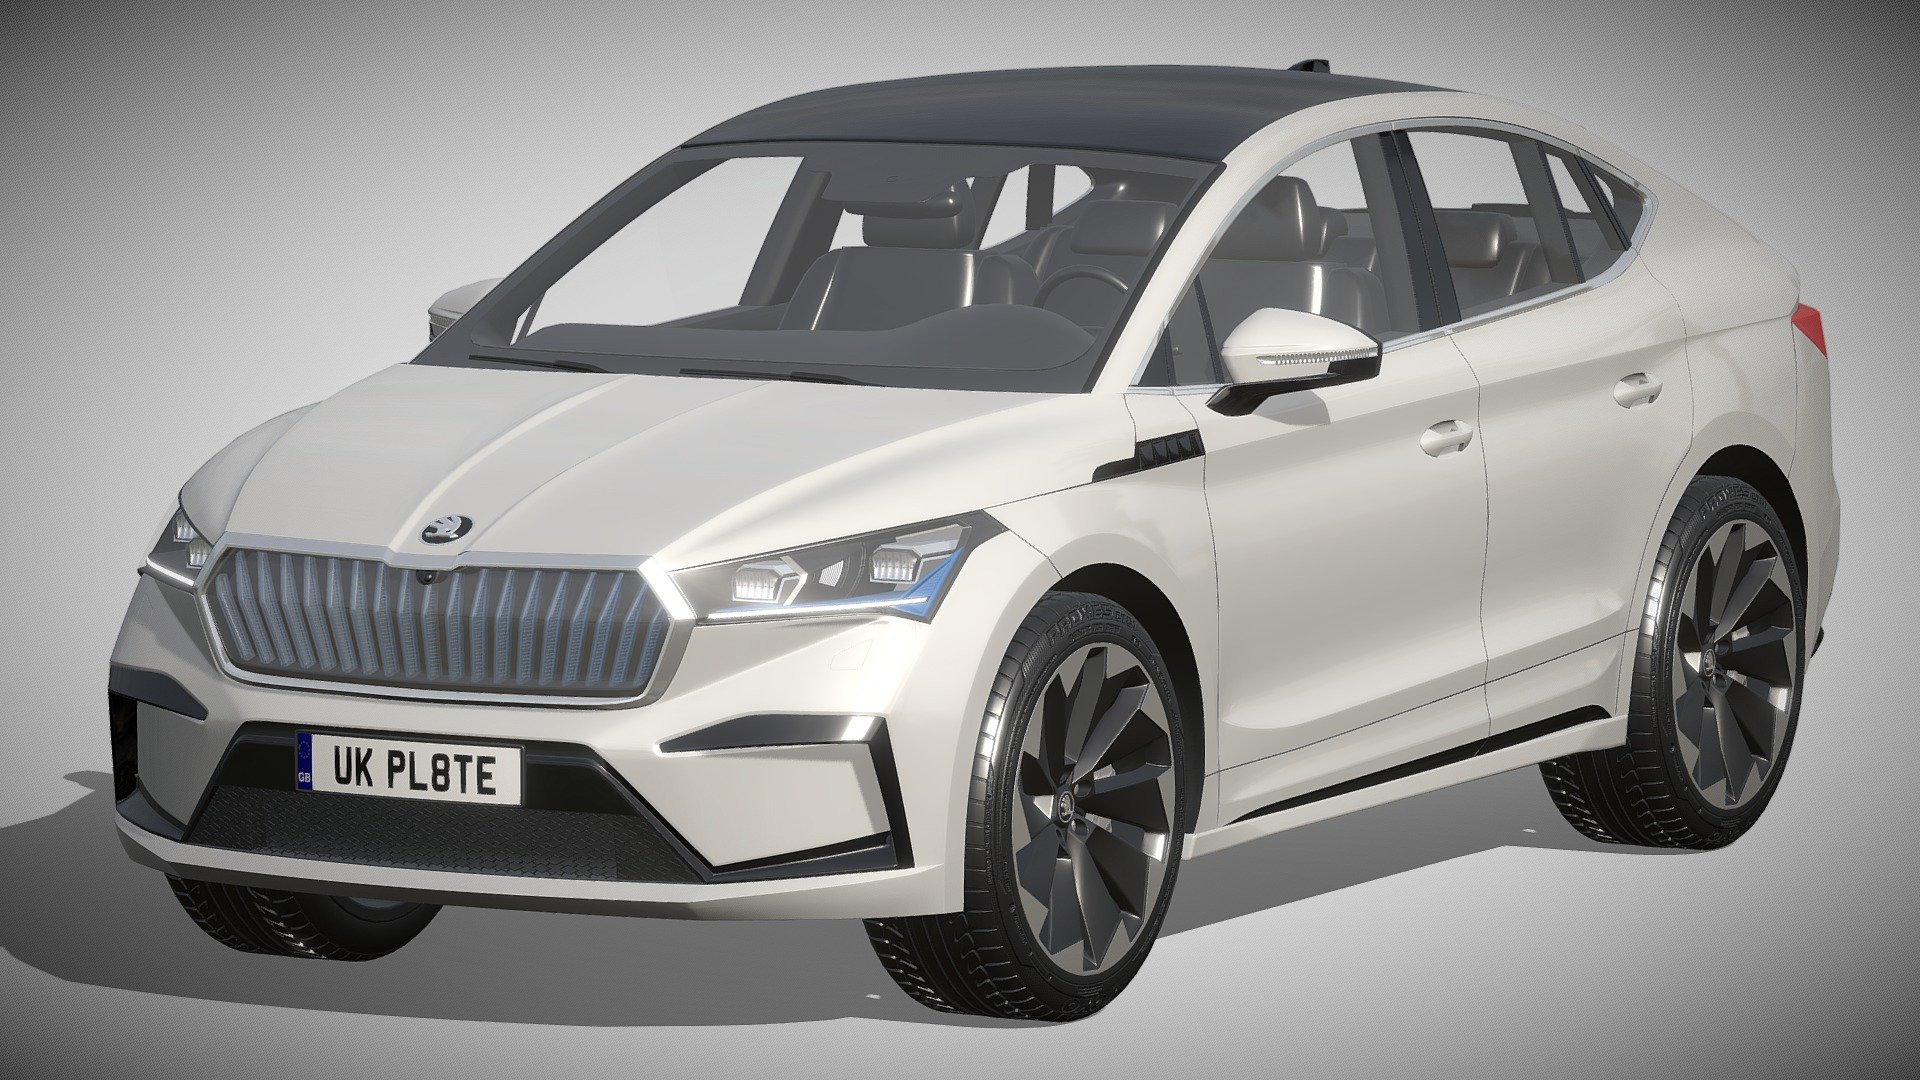 Skoda Enyaq Coupe iV

https://www.skoda-auto.com/models/range/enyaq-coupe-rs-iv

Clean geometry Light weight model, yet completely detailed for HI-Res renders. Use for movies, Advertisements or games

Corona render and materials

All textures include in *.rar files

Lighting setup is not included in the file! - Skoda Enyaq Coupe iV - Buy Royalty Free 3D model by zifir3d 3d model